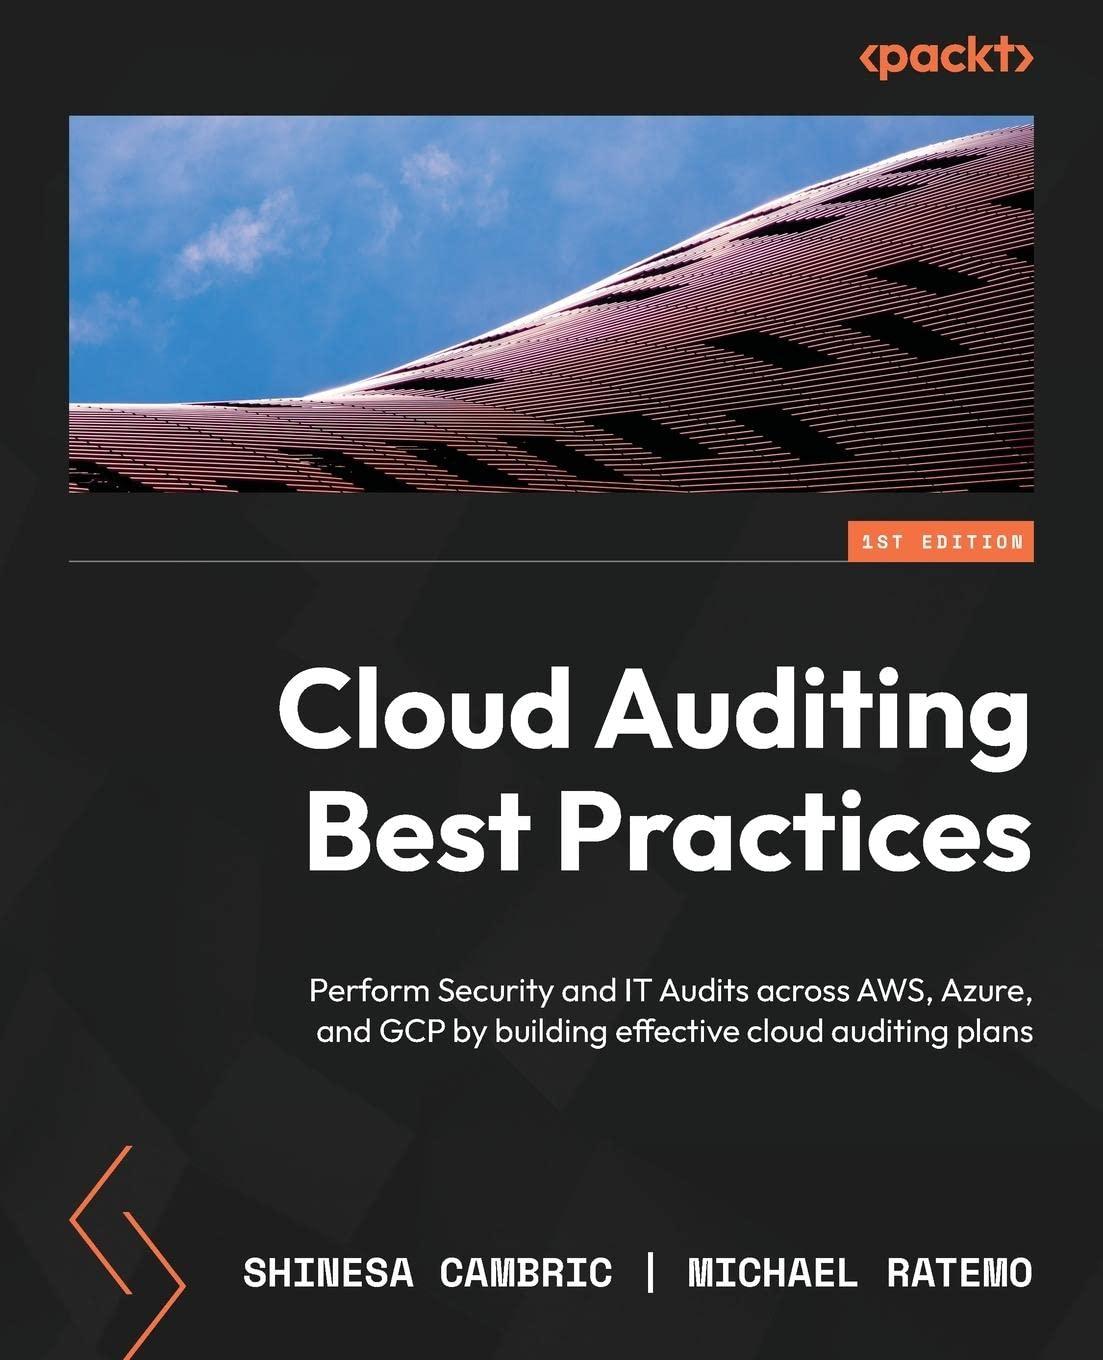 Cloud Auditing Best Practices Perform Security And IT Audits Across AWS Azure And GCP By Building Effective Cloud Auditing Plans